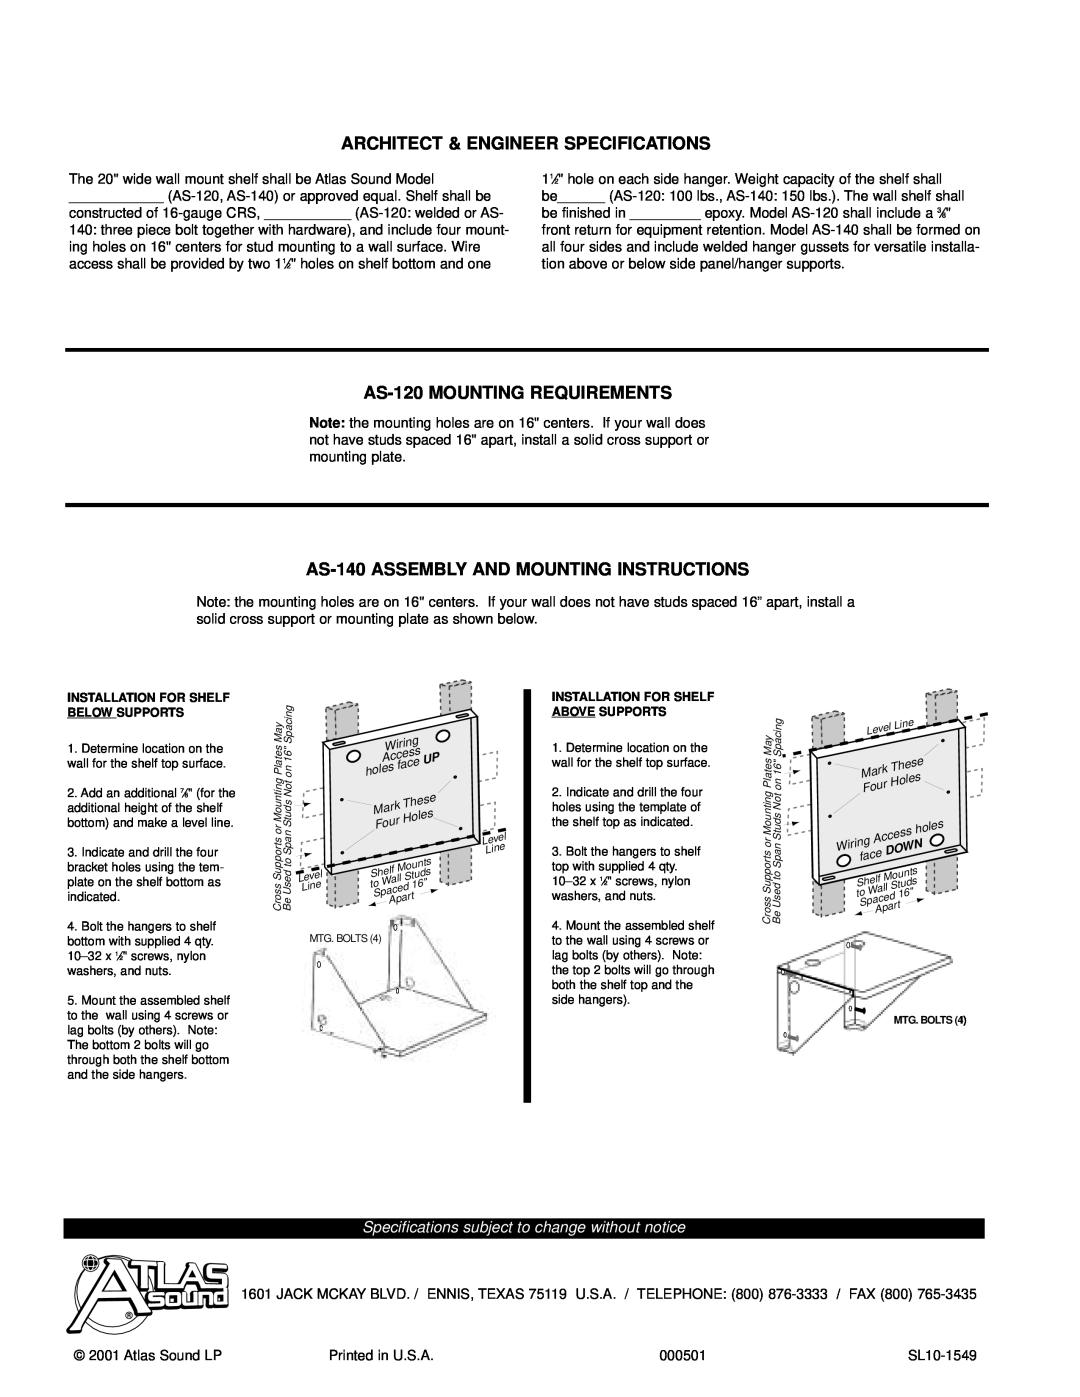 Atlas Sound AS-140 specifications Architect & Engineer Specifications, AS-120MOUNTING REQUIREMENTS 